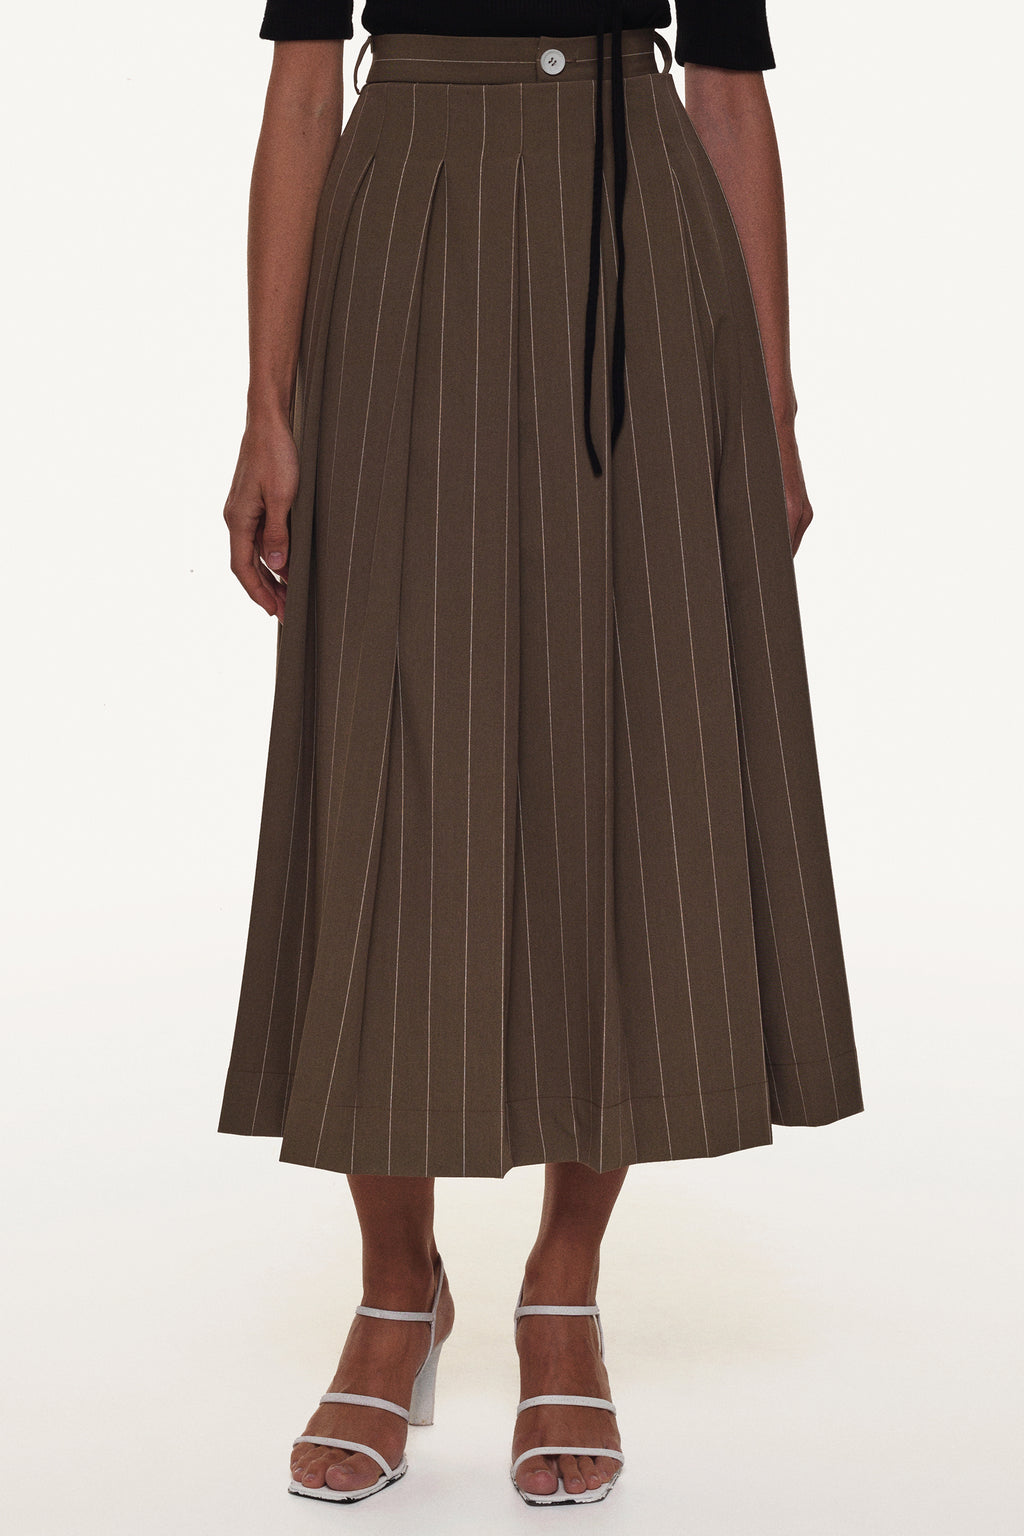 'The Executive' Pleated Skirt ARCHIVE